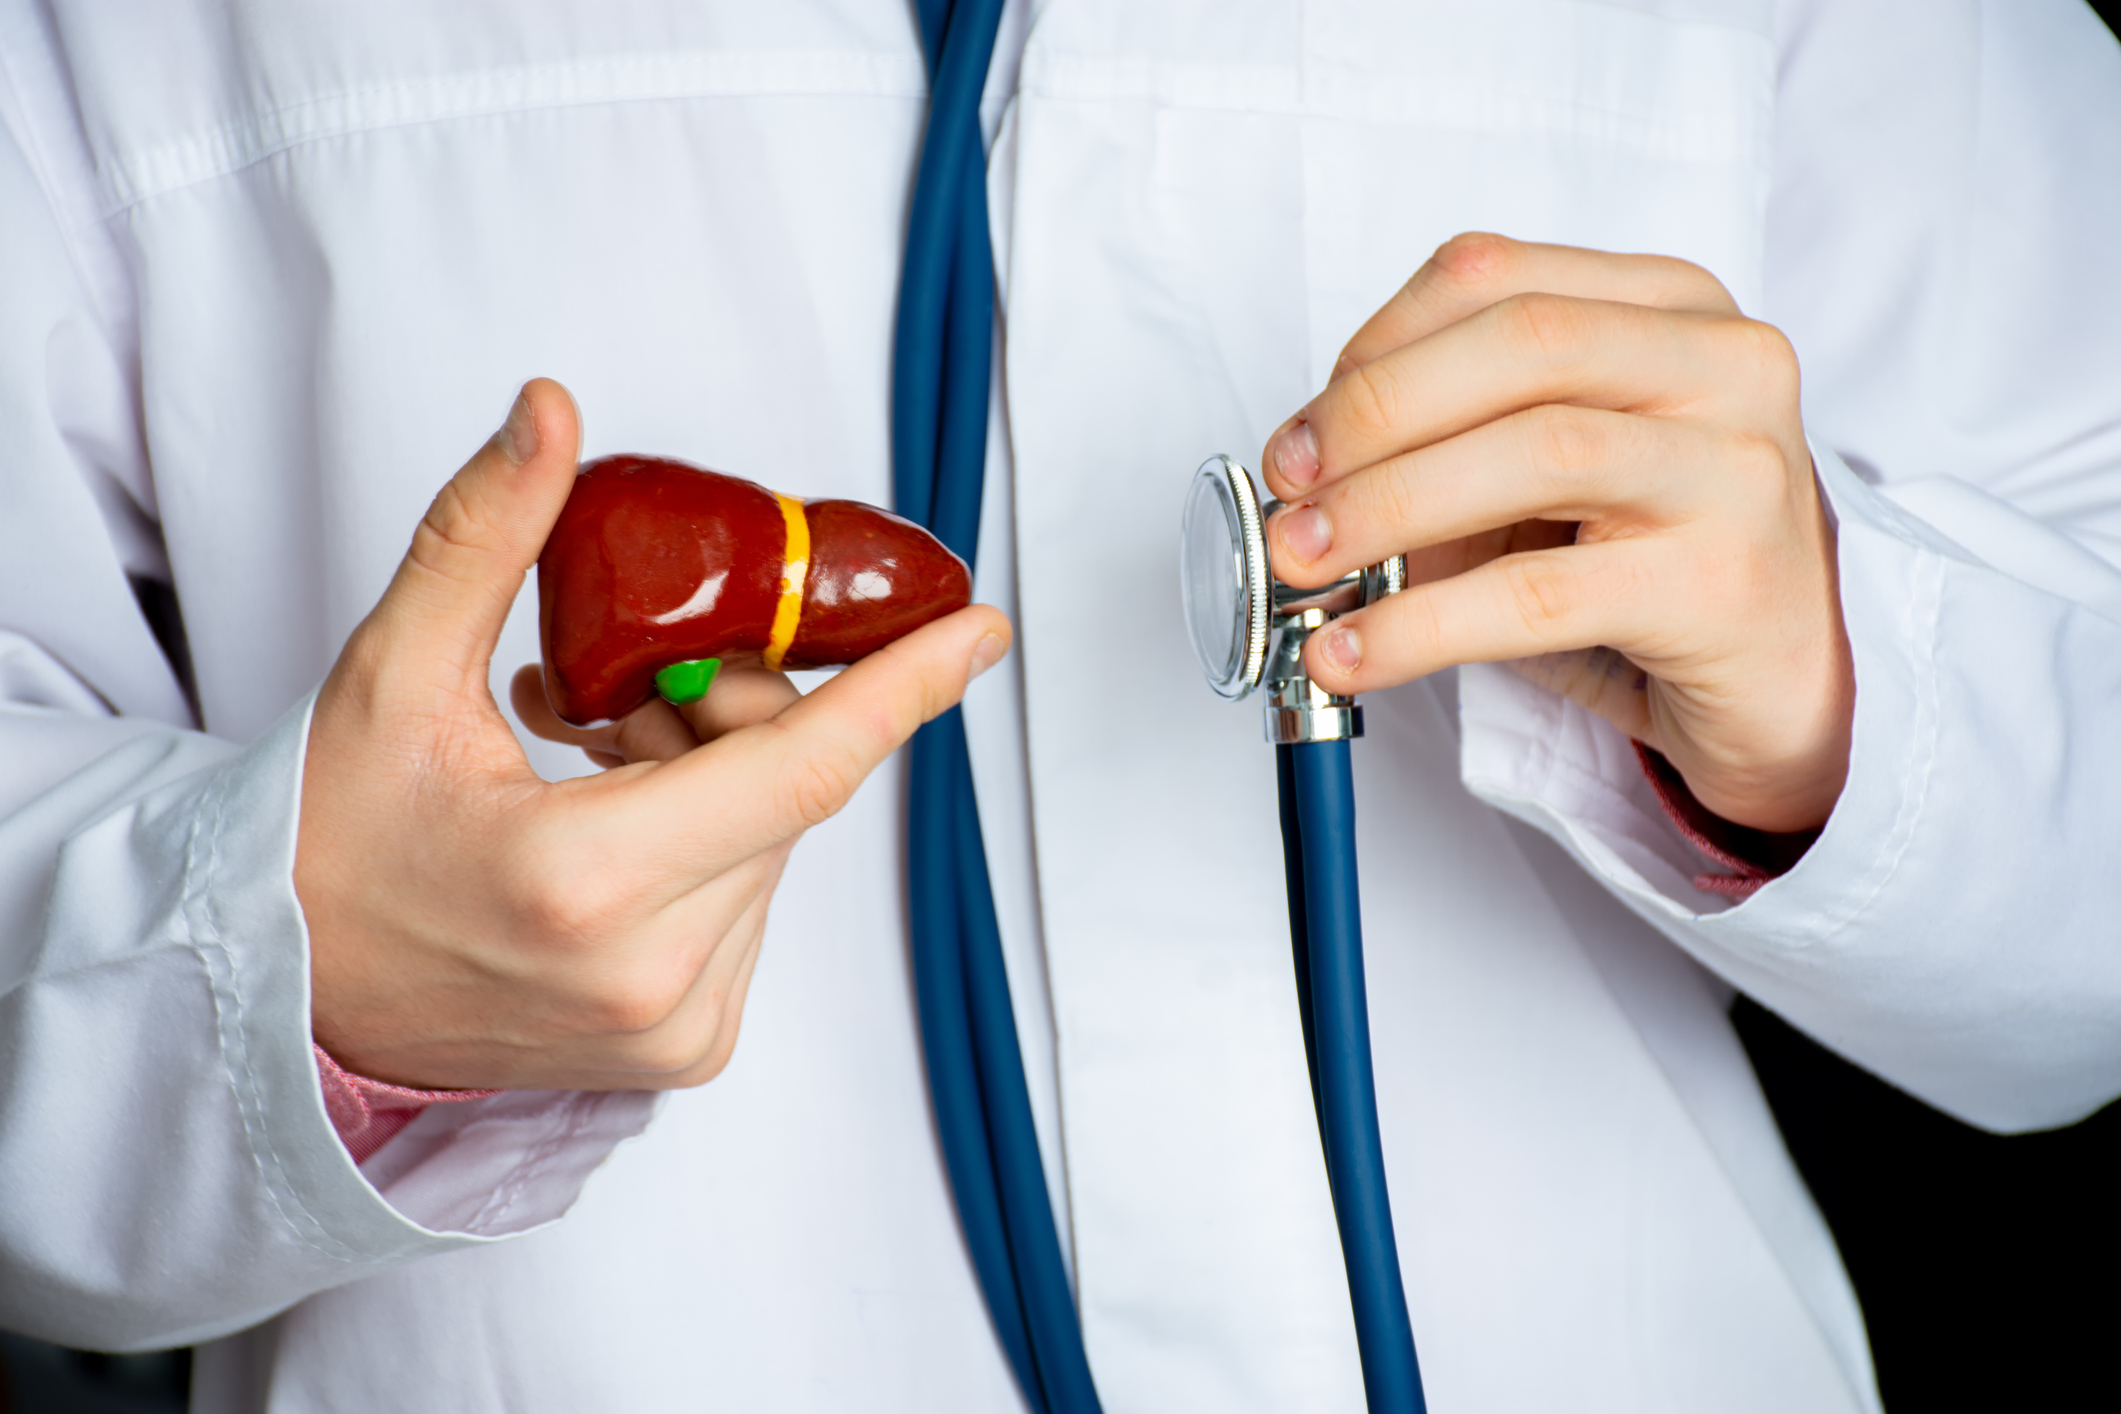 Doctor holds a liver figure in one hand, a stethoscope in the other